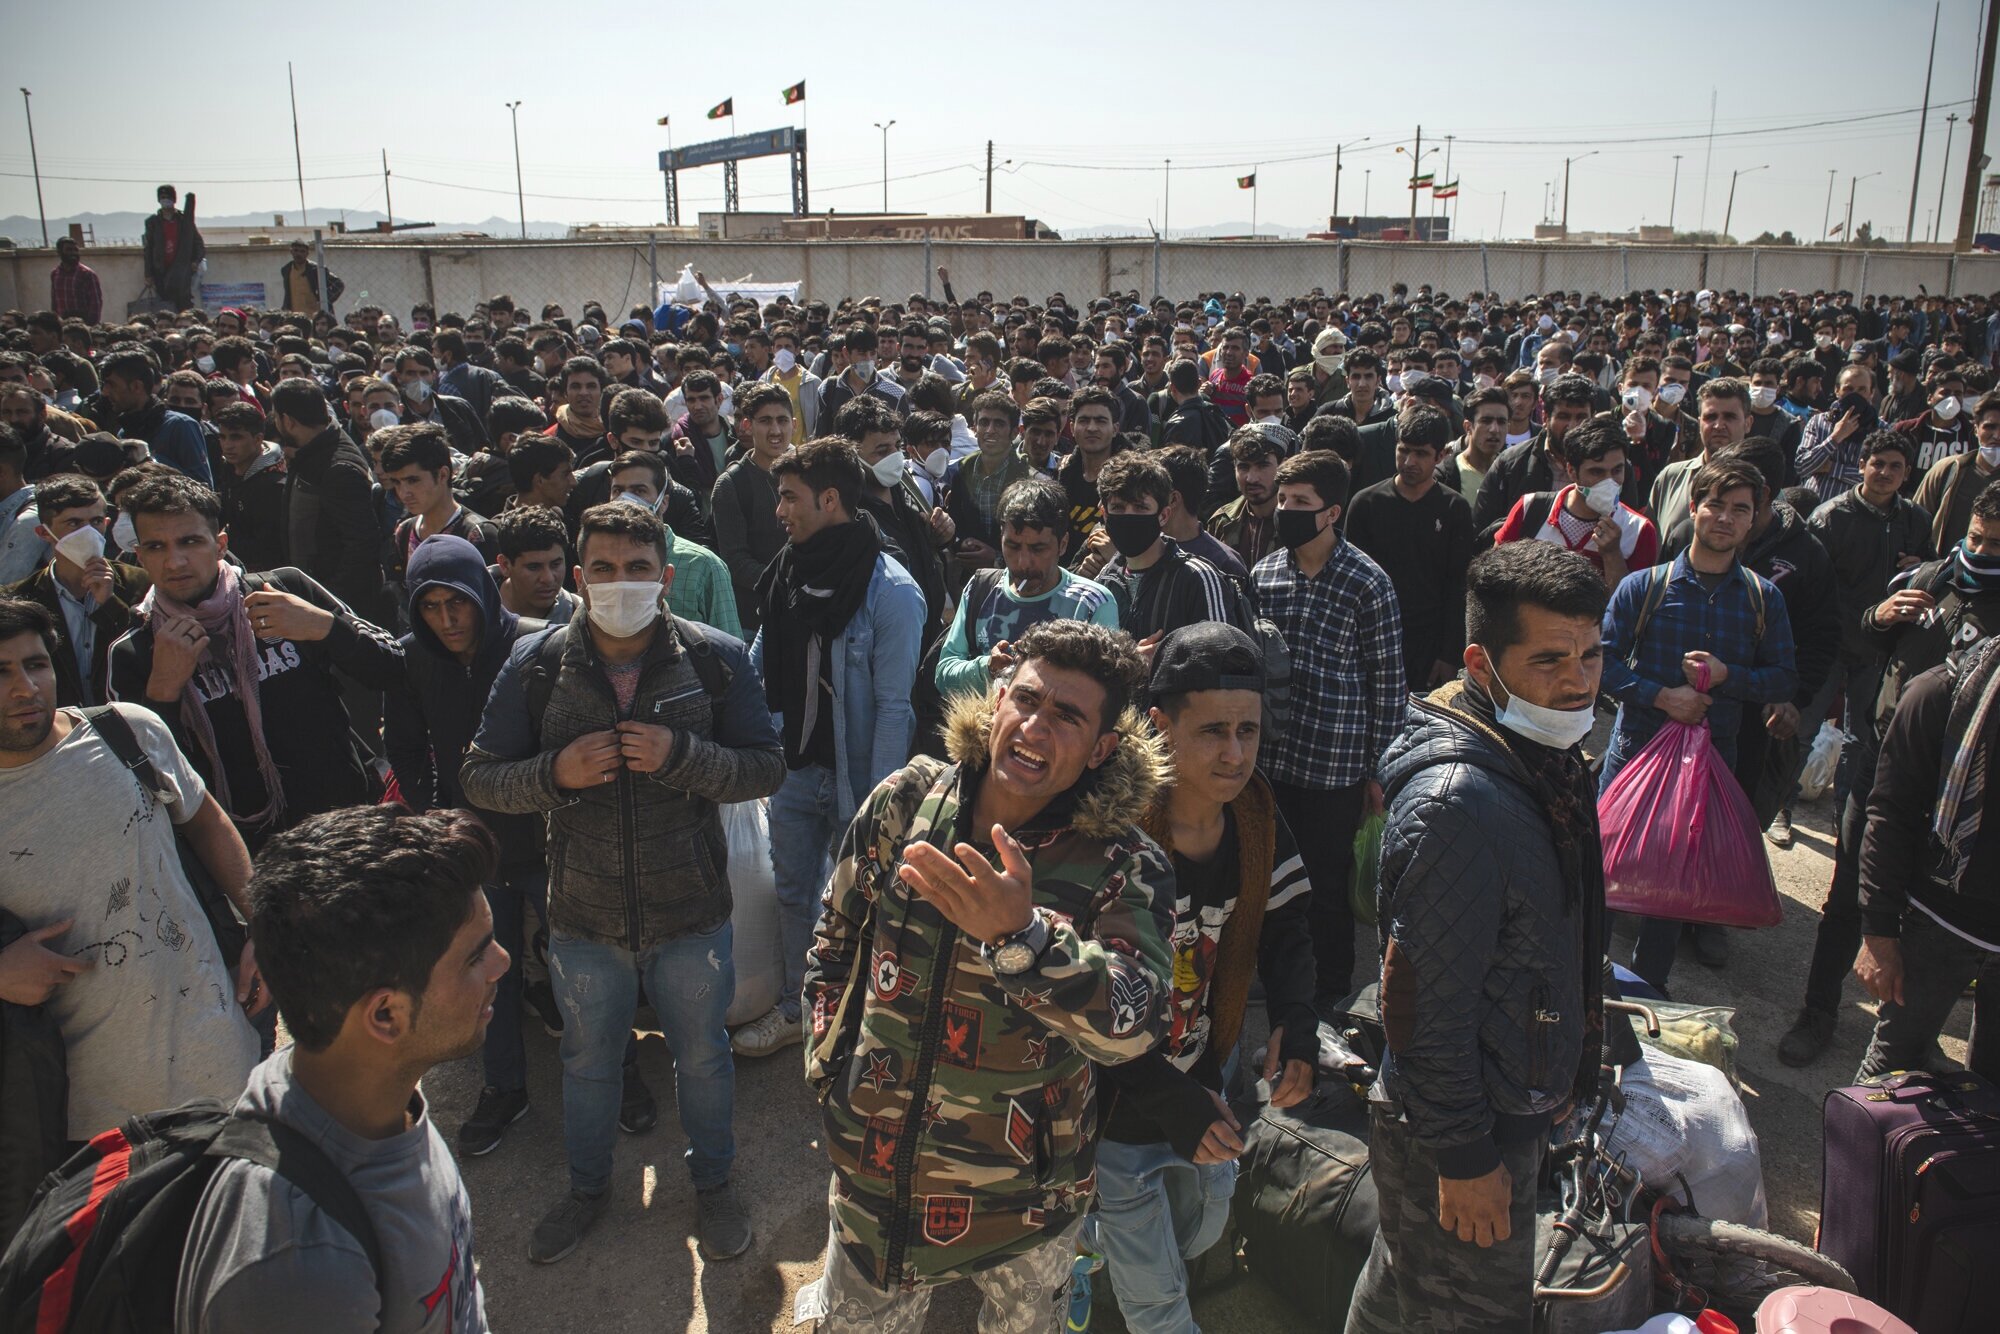  Afghan migrants wait to get through a screening process and voluntarily re-enter Afghanistan at the border with Iran due to the rise of Covid-19 in Iran on March 18, 2020. © Kiana Hayeri 